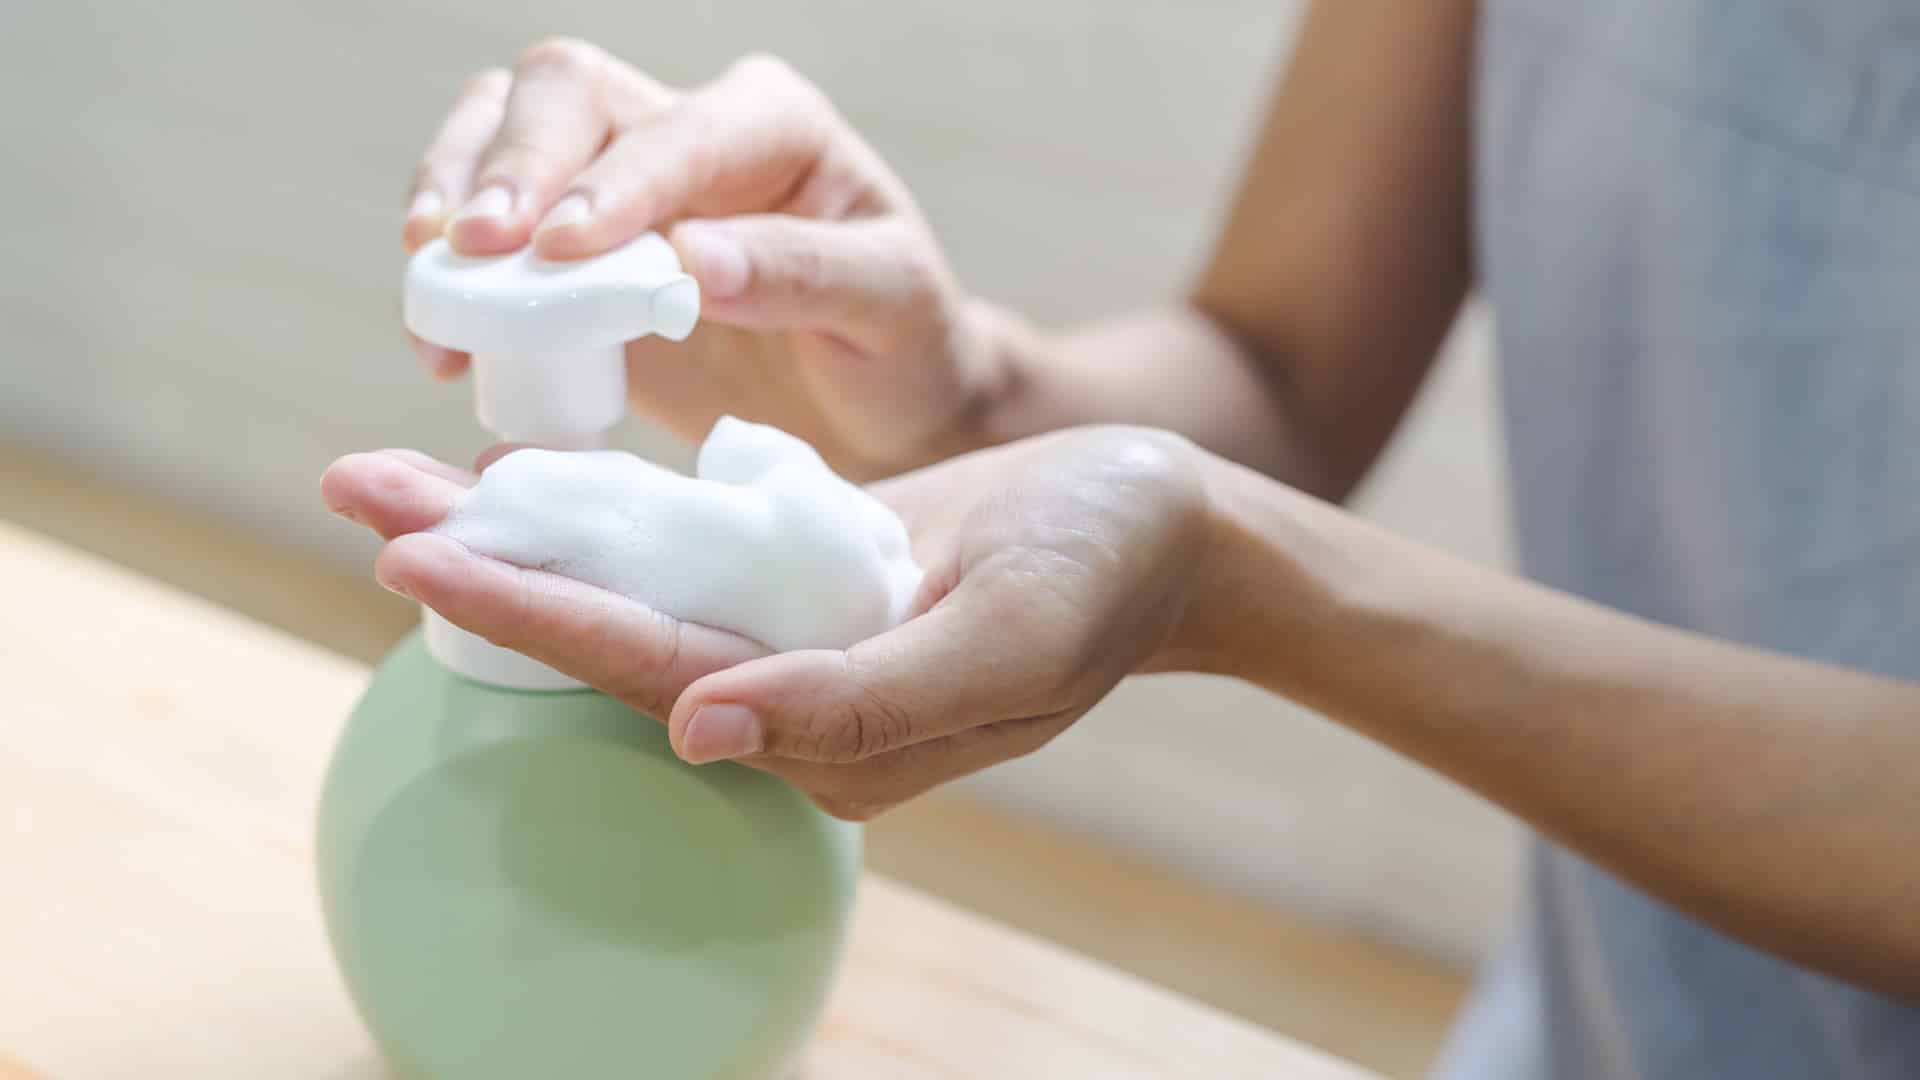 A woman pumps foaming soap onto her hands.